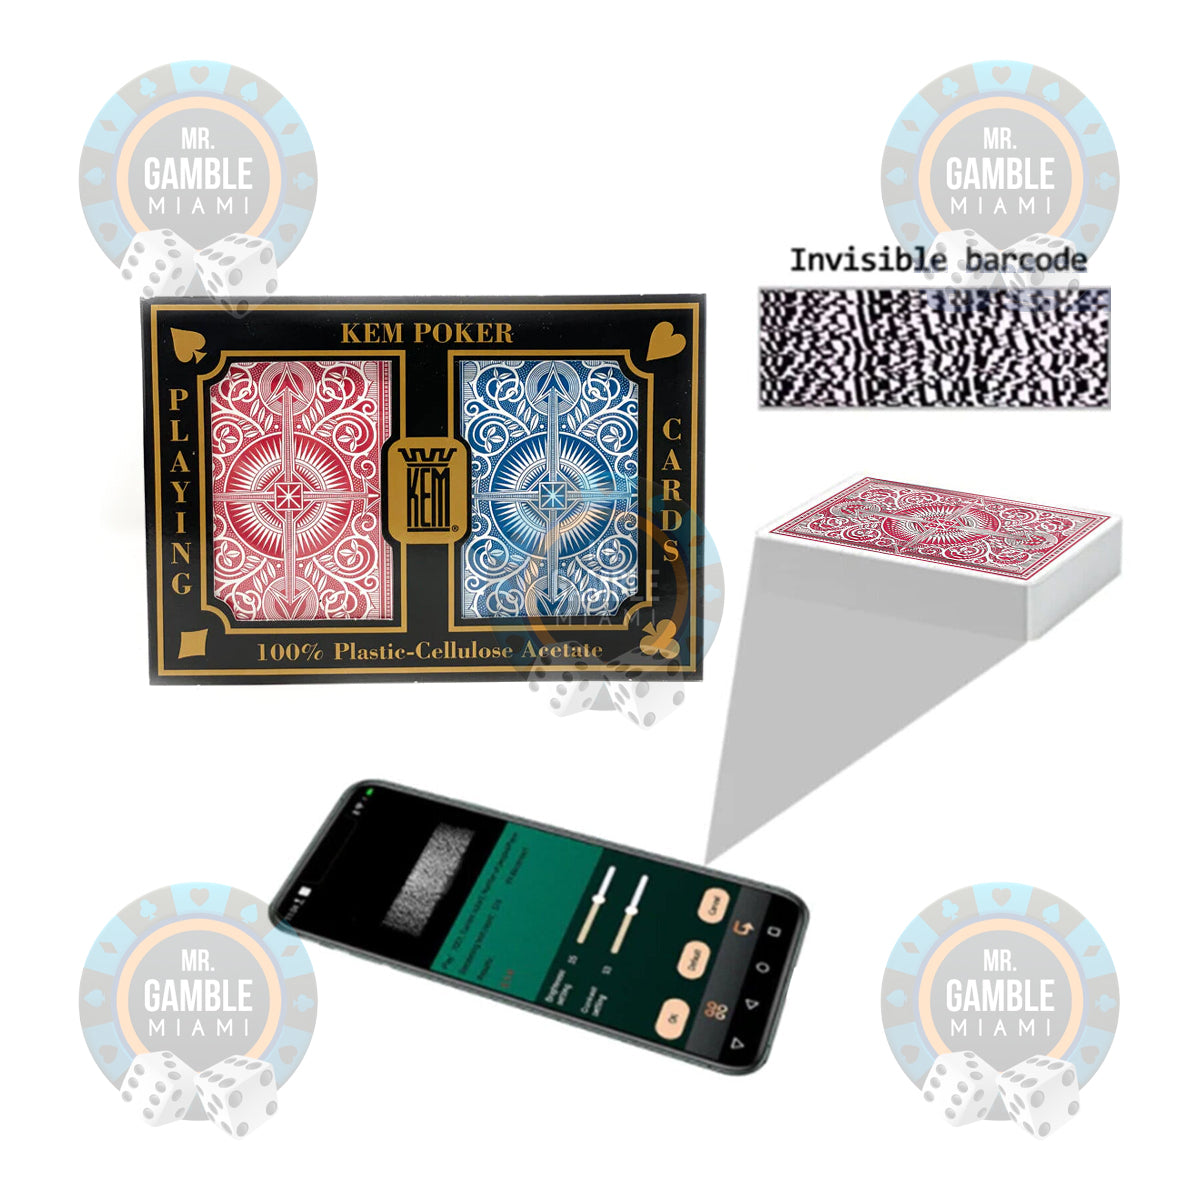 Barcode Marked Cards - Martin Kabrhel Poker Cheating Devices